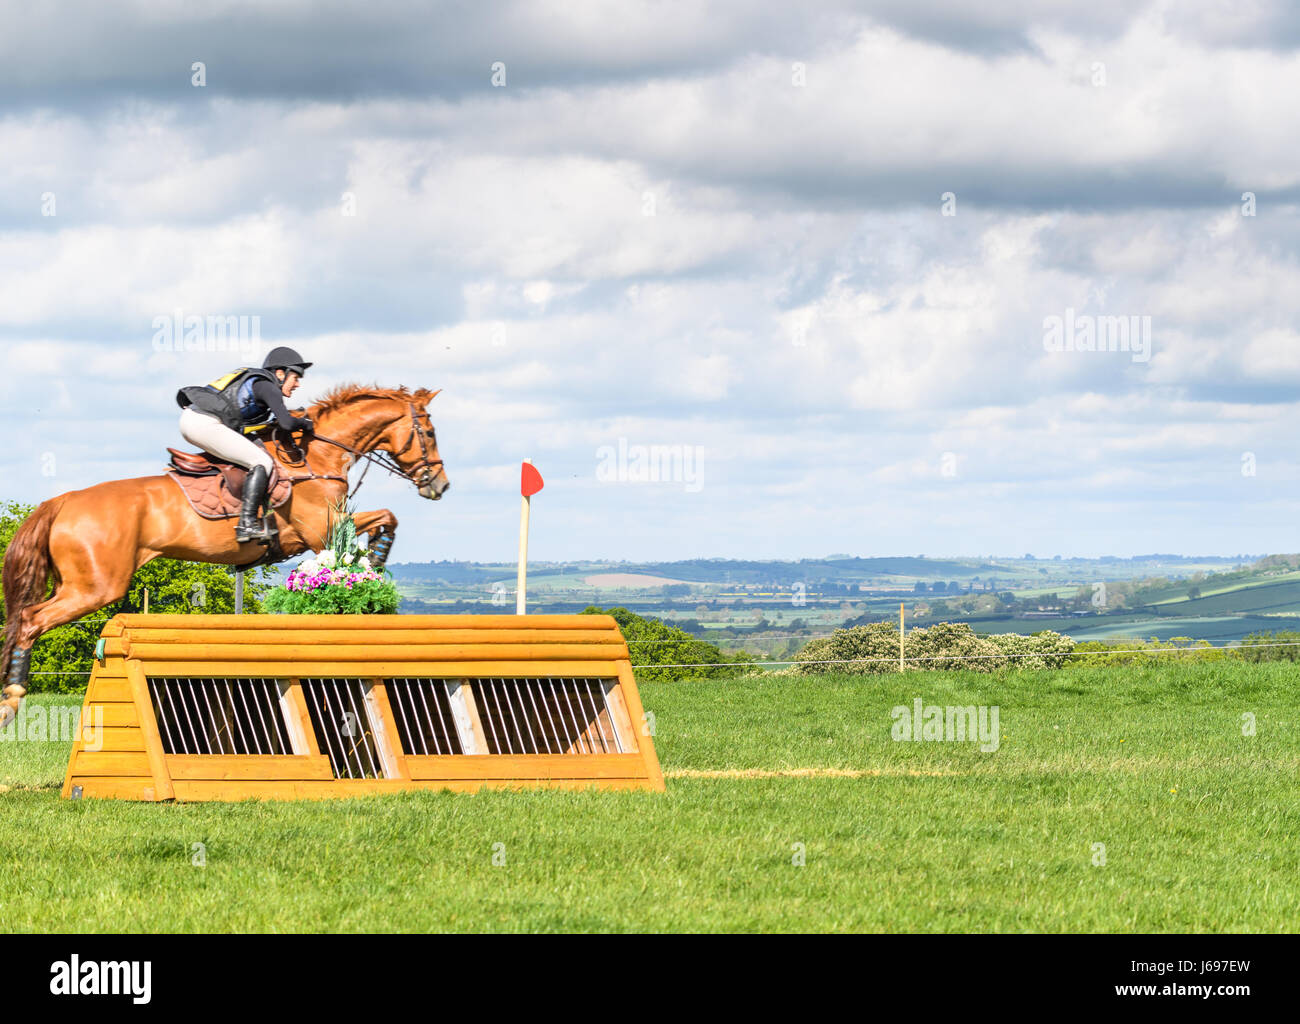 Rockingham Castle grounds, Corby, England. Saturday 20th May 2017. Elphege Copet-Dortet and her horse Ulahupbiats leap an obstacle with the Welland valley in the background during the cross country phase of the Rockingham International Horse Trials on Saturday 20th May 2017 in the grounds of the norman Rockingham castle at Corby, England. Credit: miscellany/Alamy Live News Stock Photo